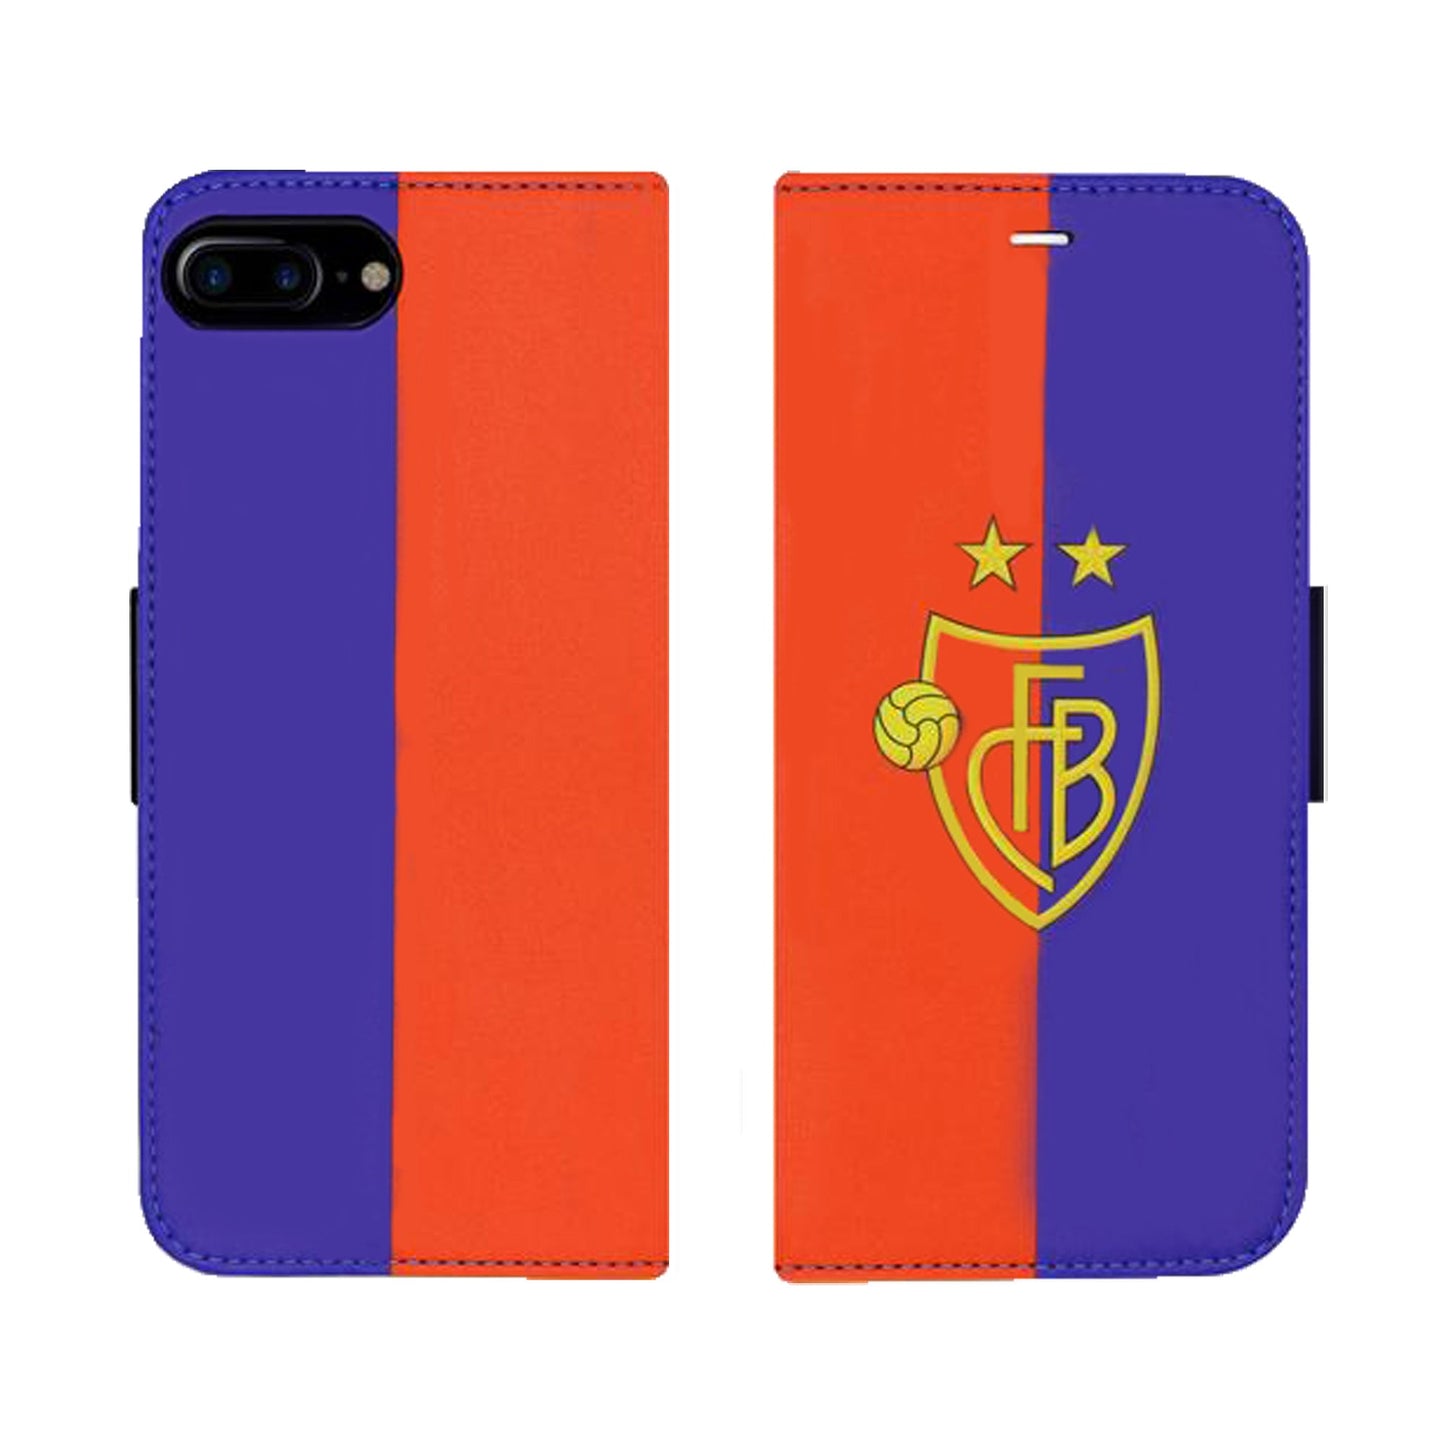 FCB Red / Blue Victor Case for iPhone 6/6S/7/8 Plus